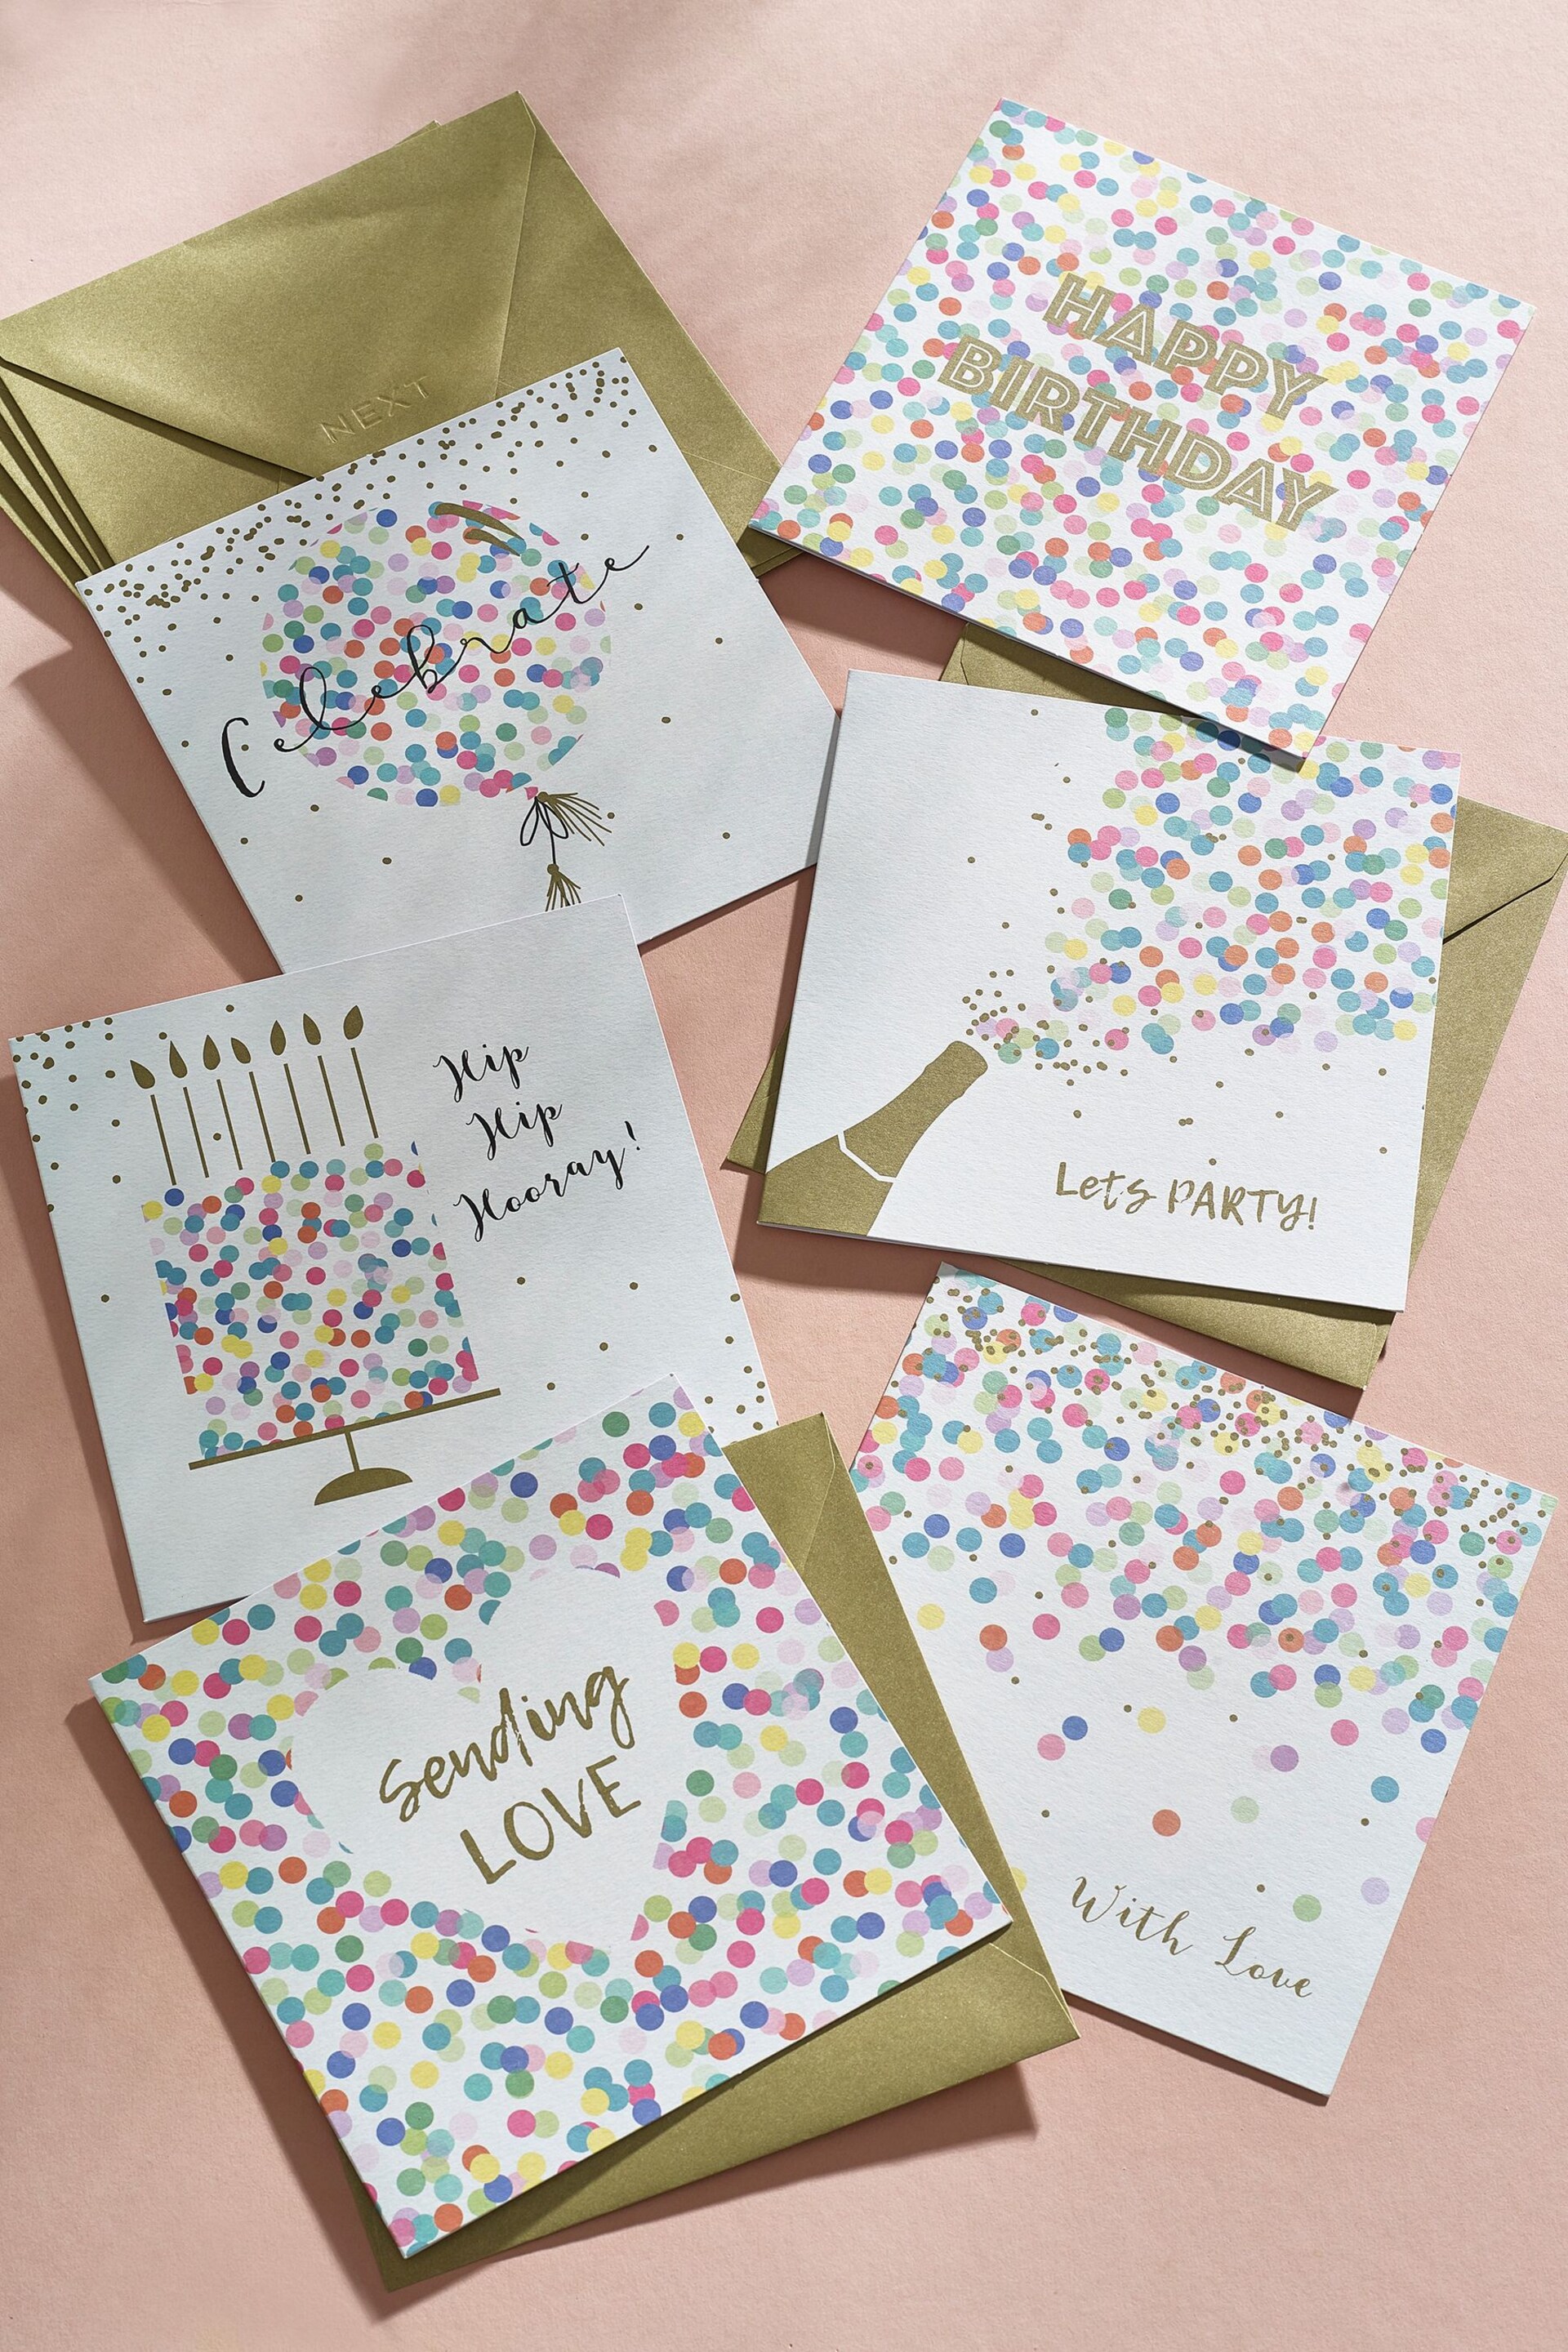 6 Pack White Mixed Occasion Cards - Image 1 of 3